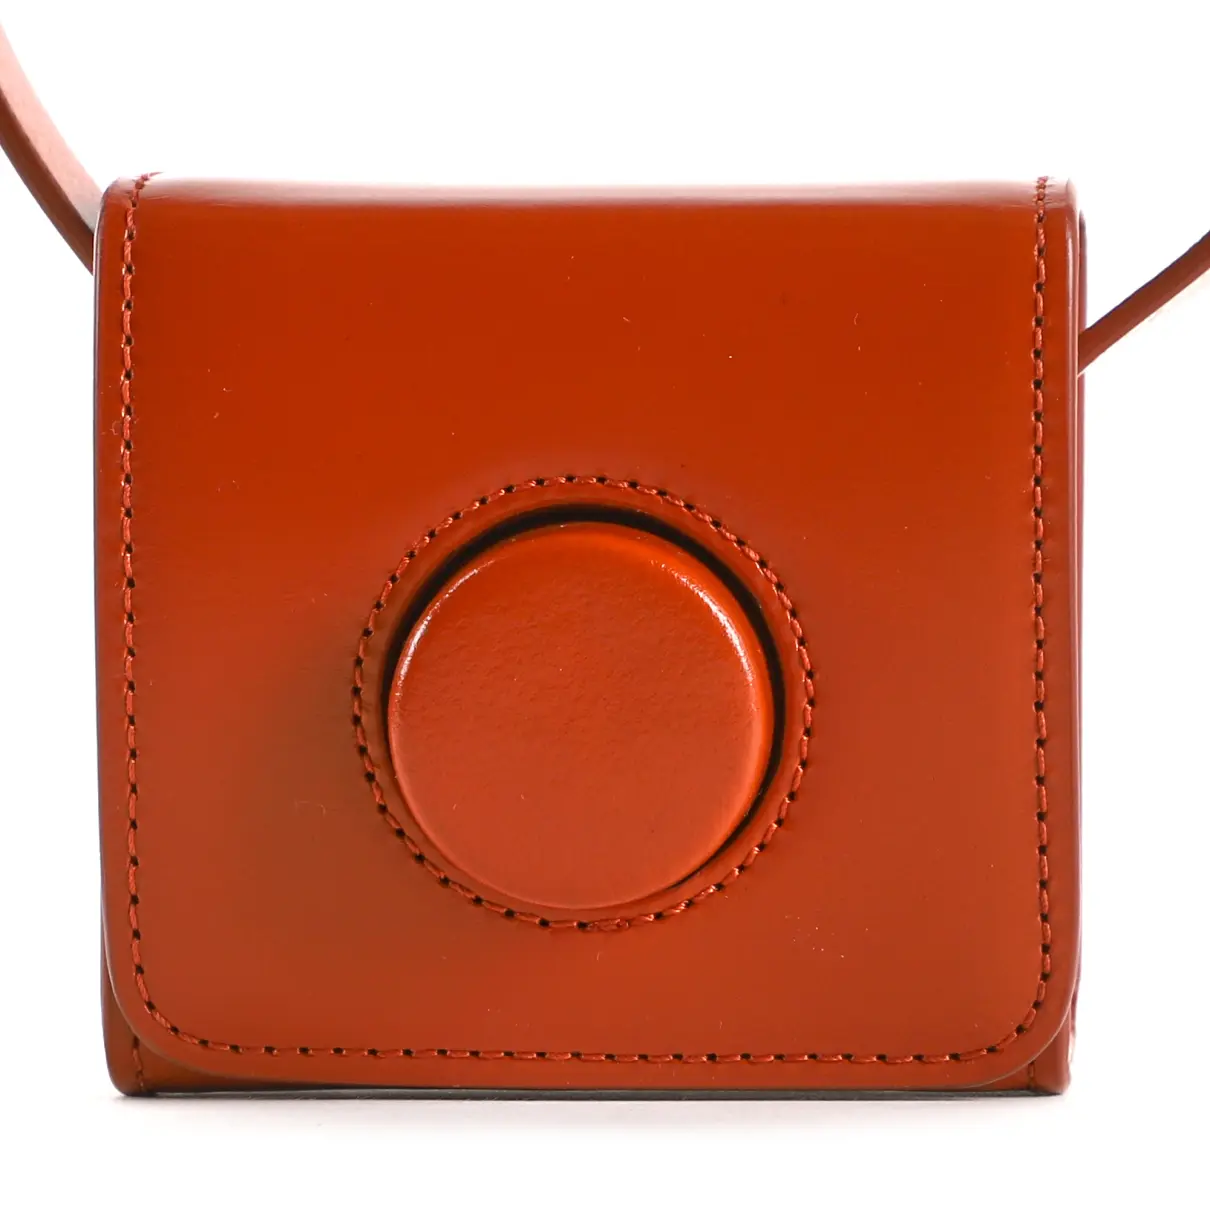 Leather crossbody bag Lemaire